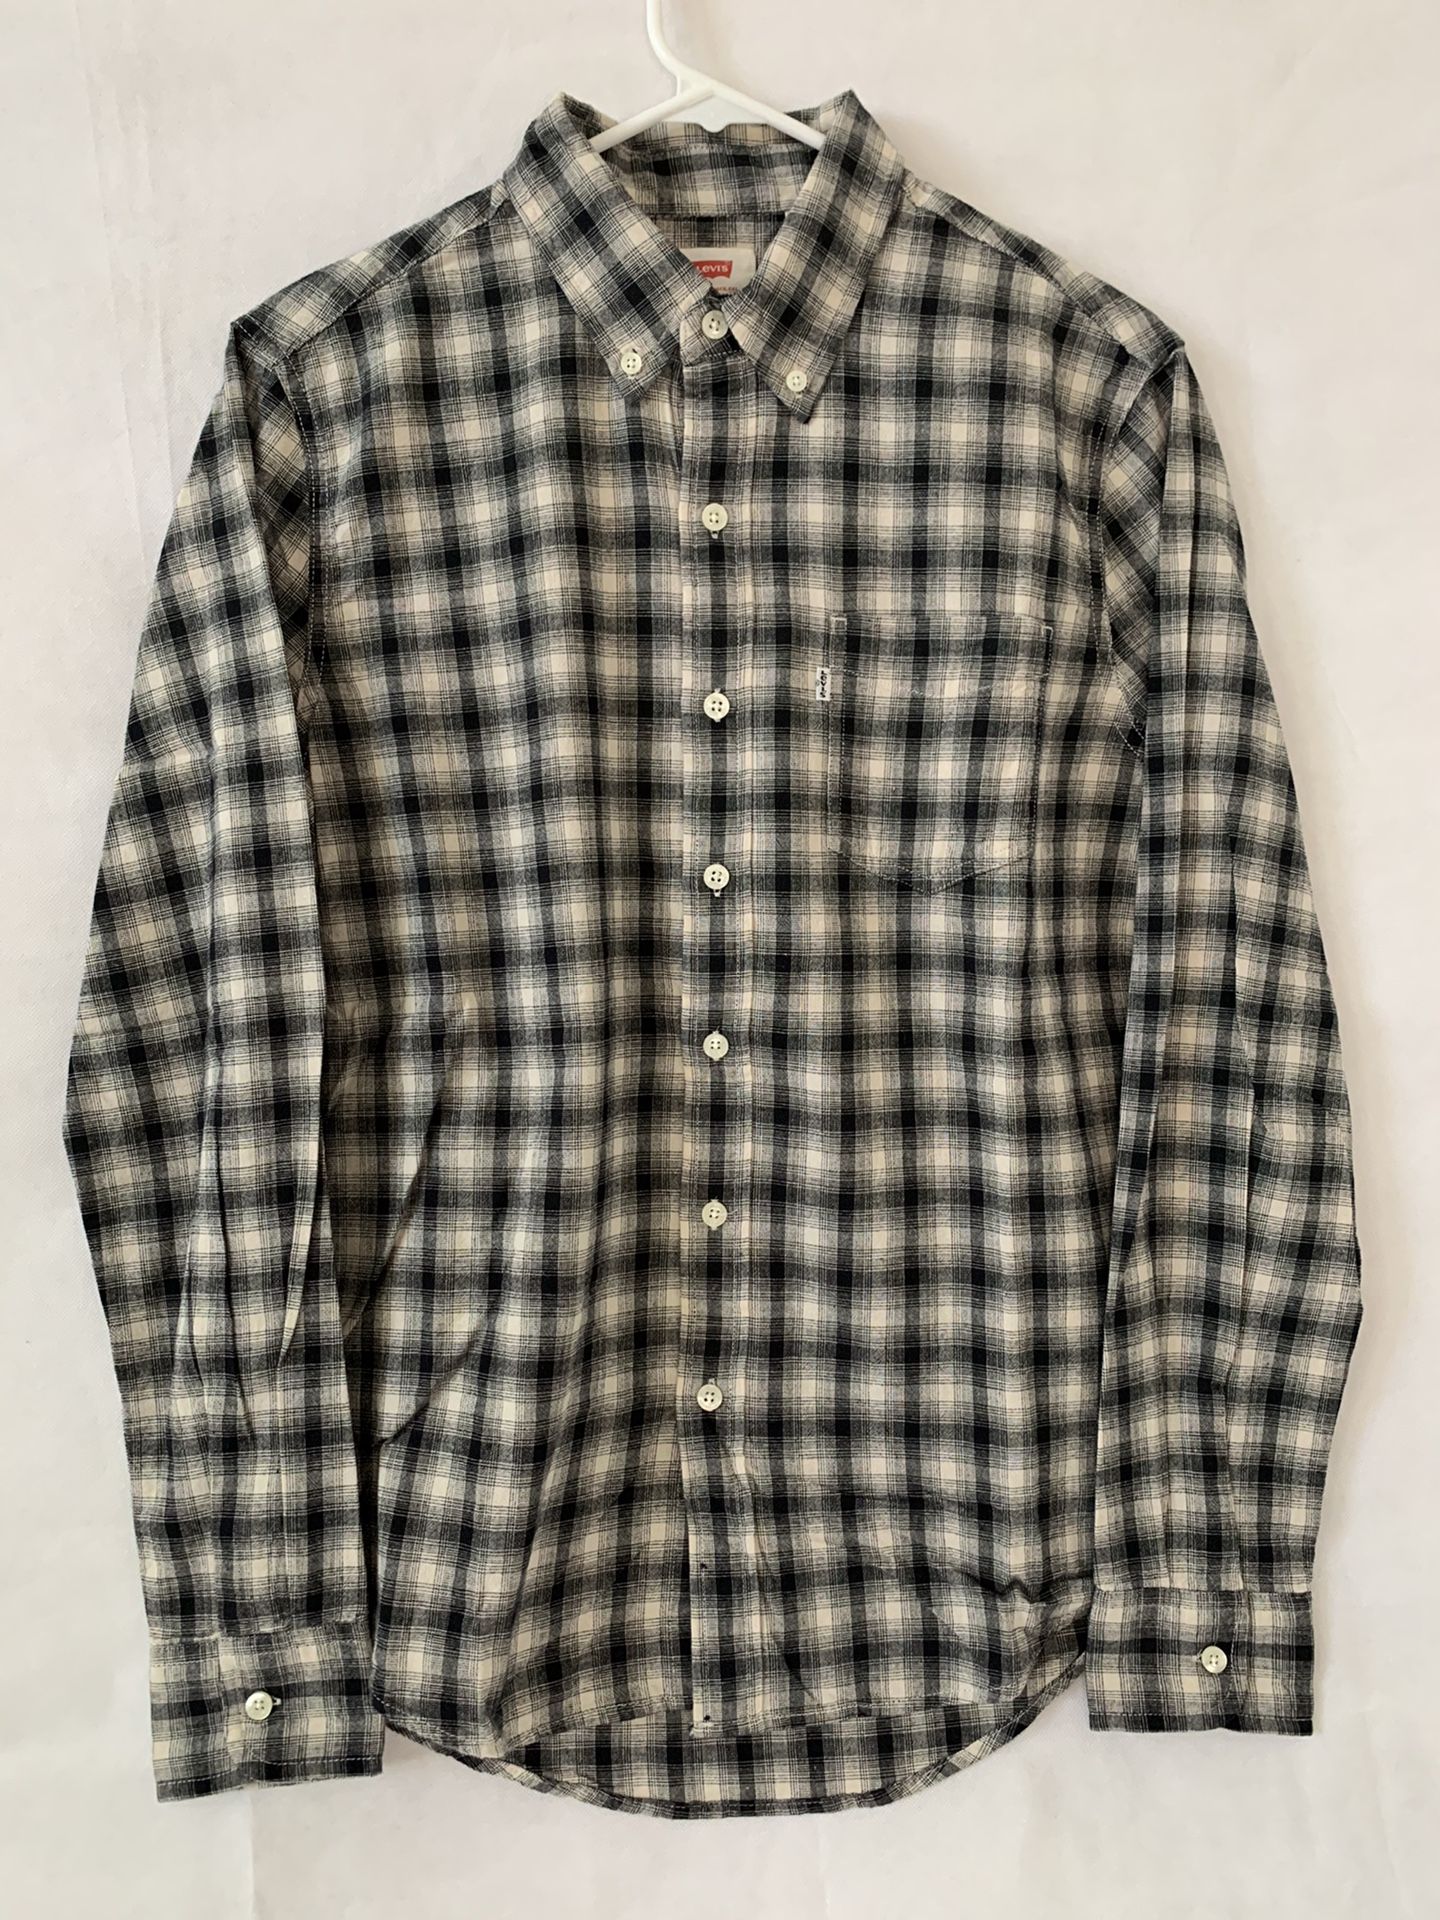 Levi’s Men Shirt. Size S Brand new with tags